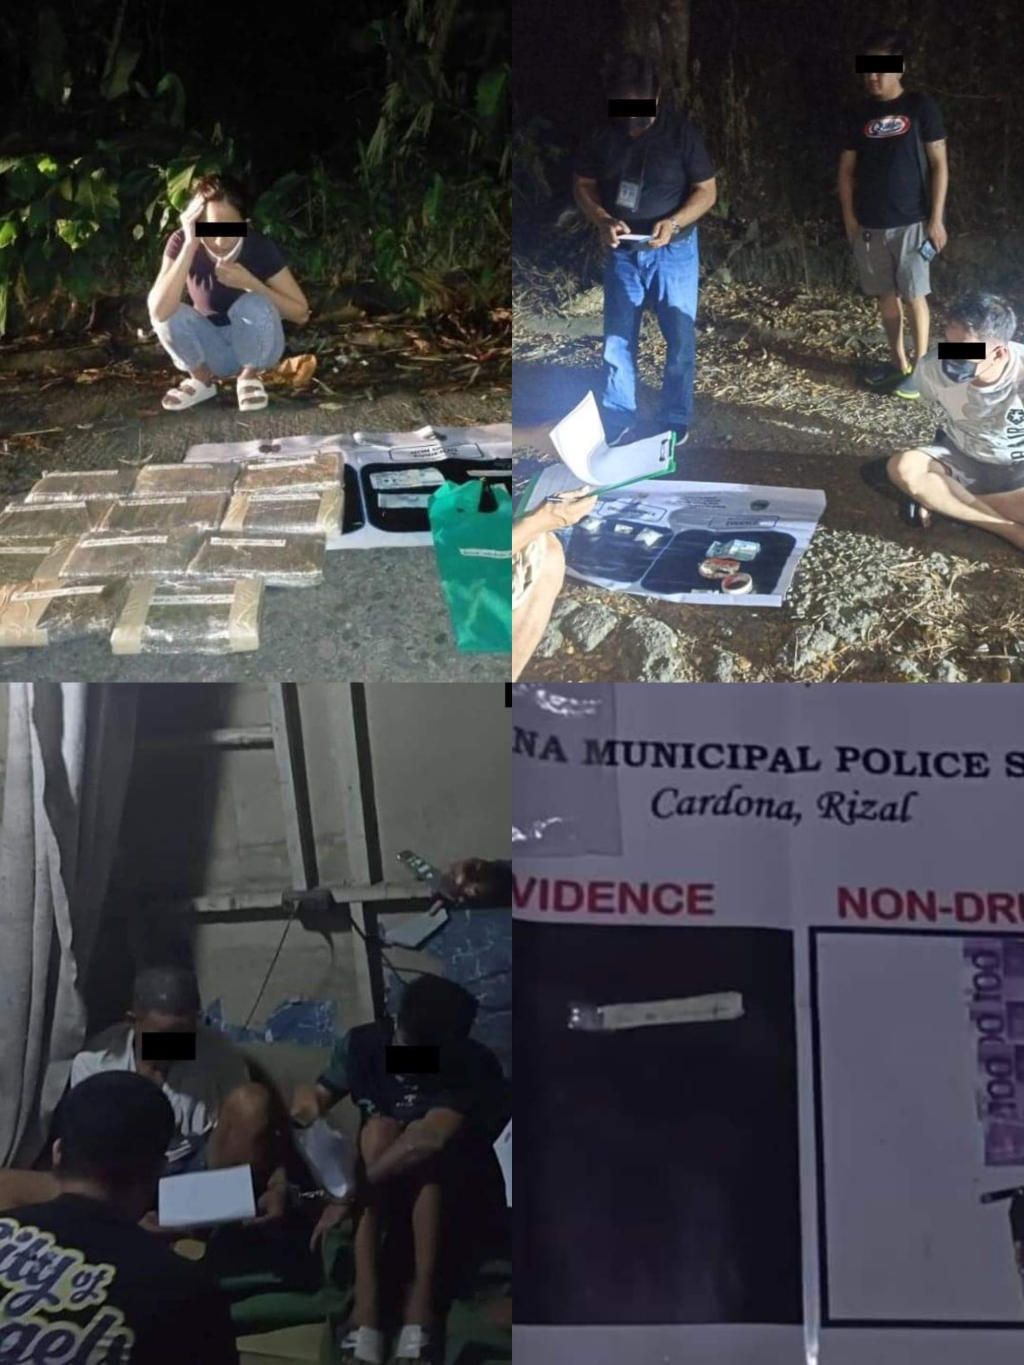 PNP CALABARZON Confiscates 1.8M Worth of Illegal Drugs in 24 Hours